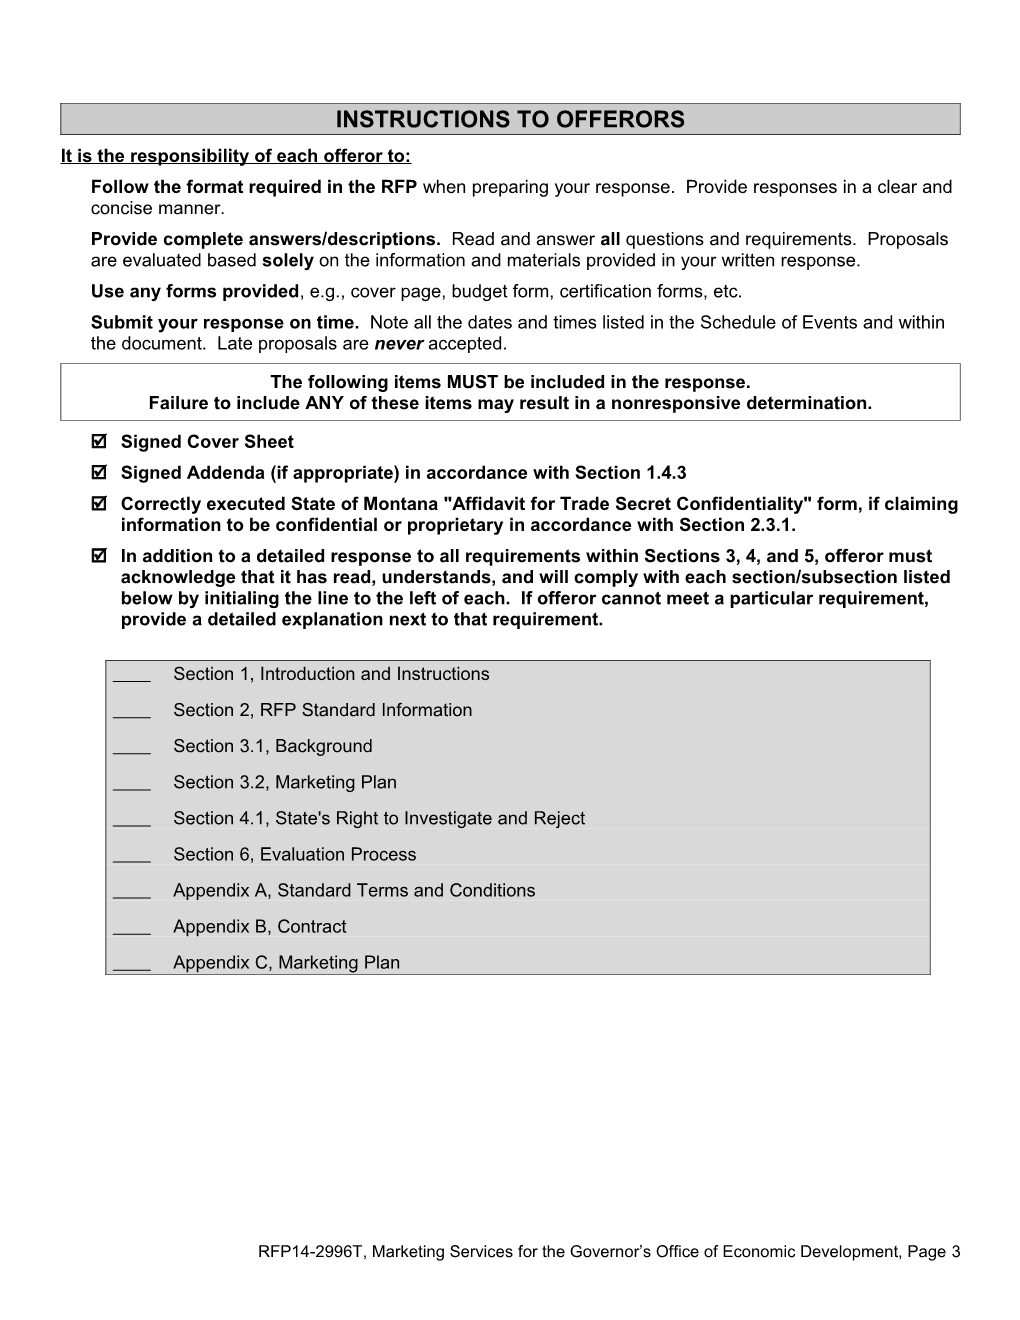 RFP14-2996T, Marketing Services for the Governor S Office of Economic Development, Page 1